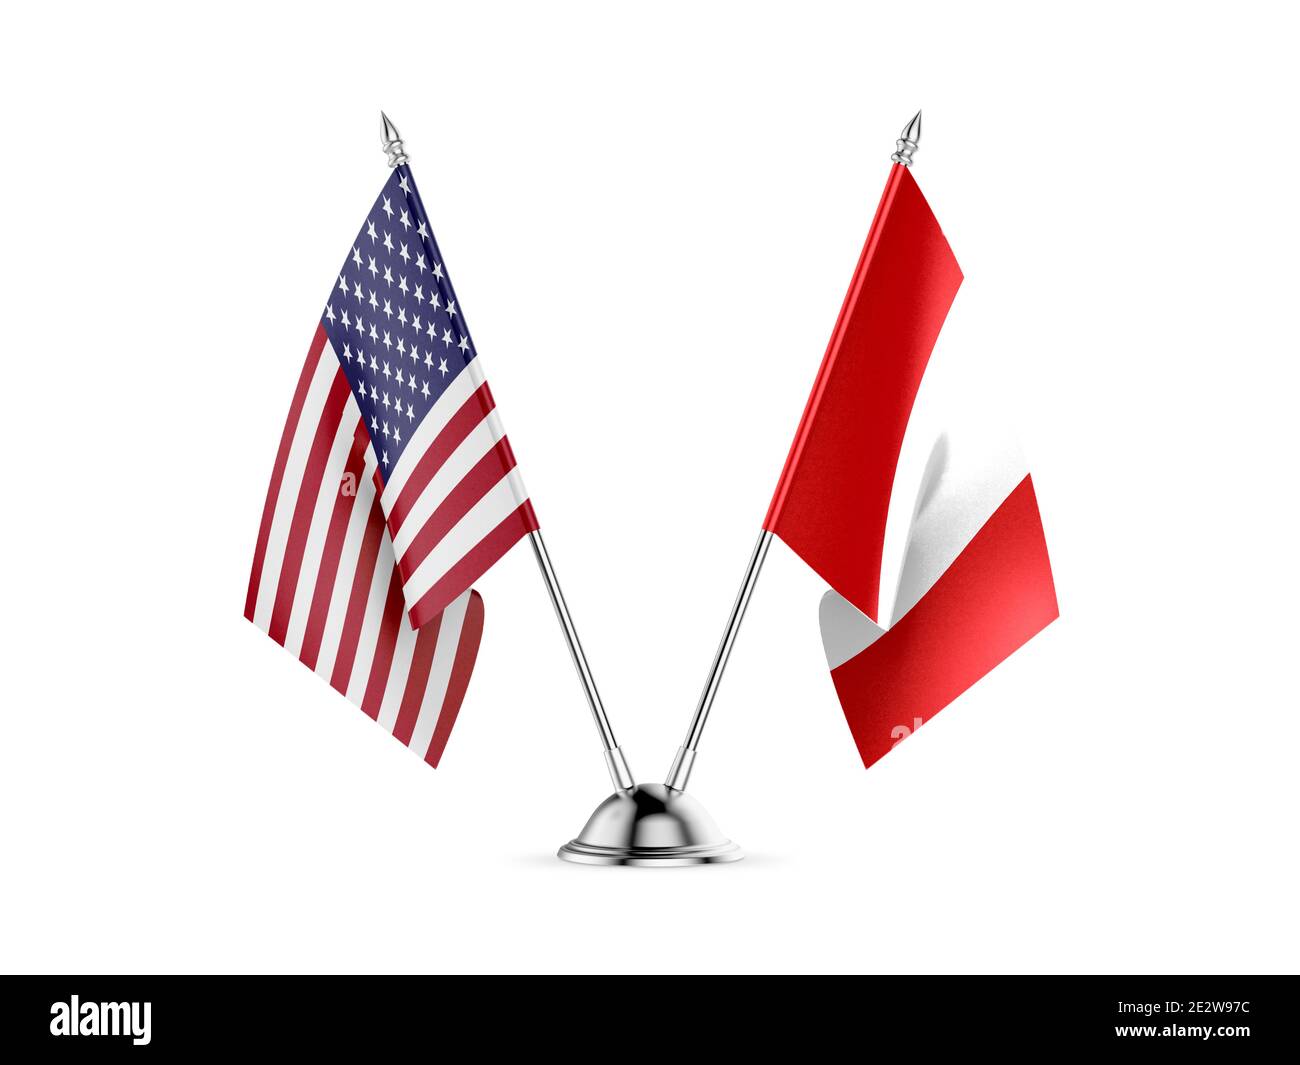 Desk flags, United States  America  and Peru, isolated on white background. 3d image Stock Photo